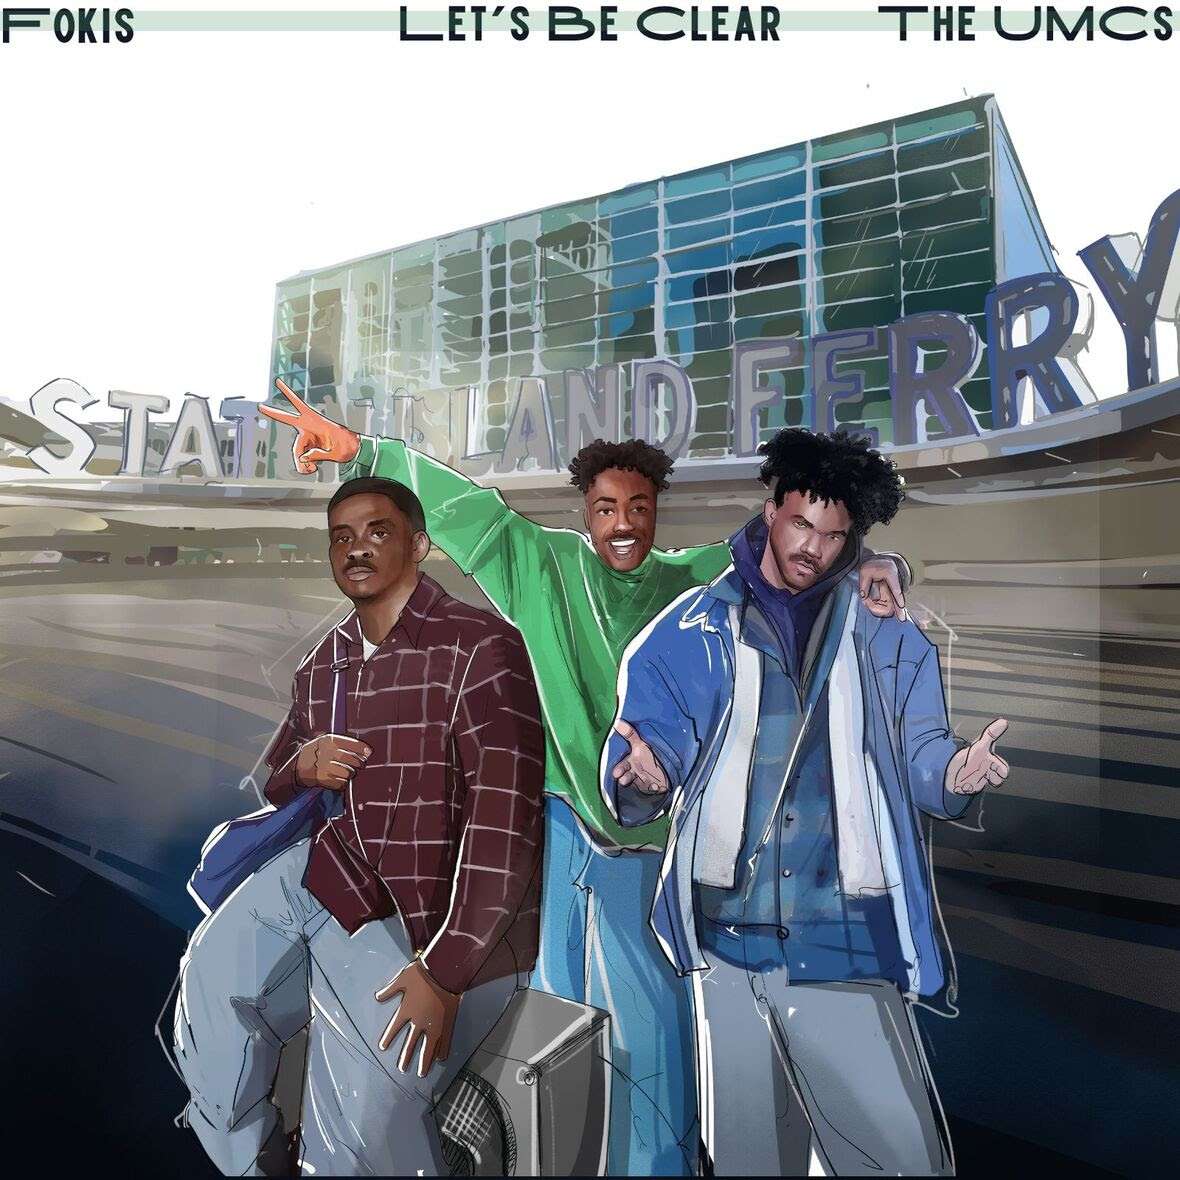 Fokis Ft. The UMC’s – “Let’s Be Clear”